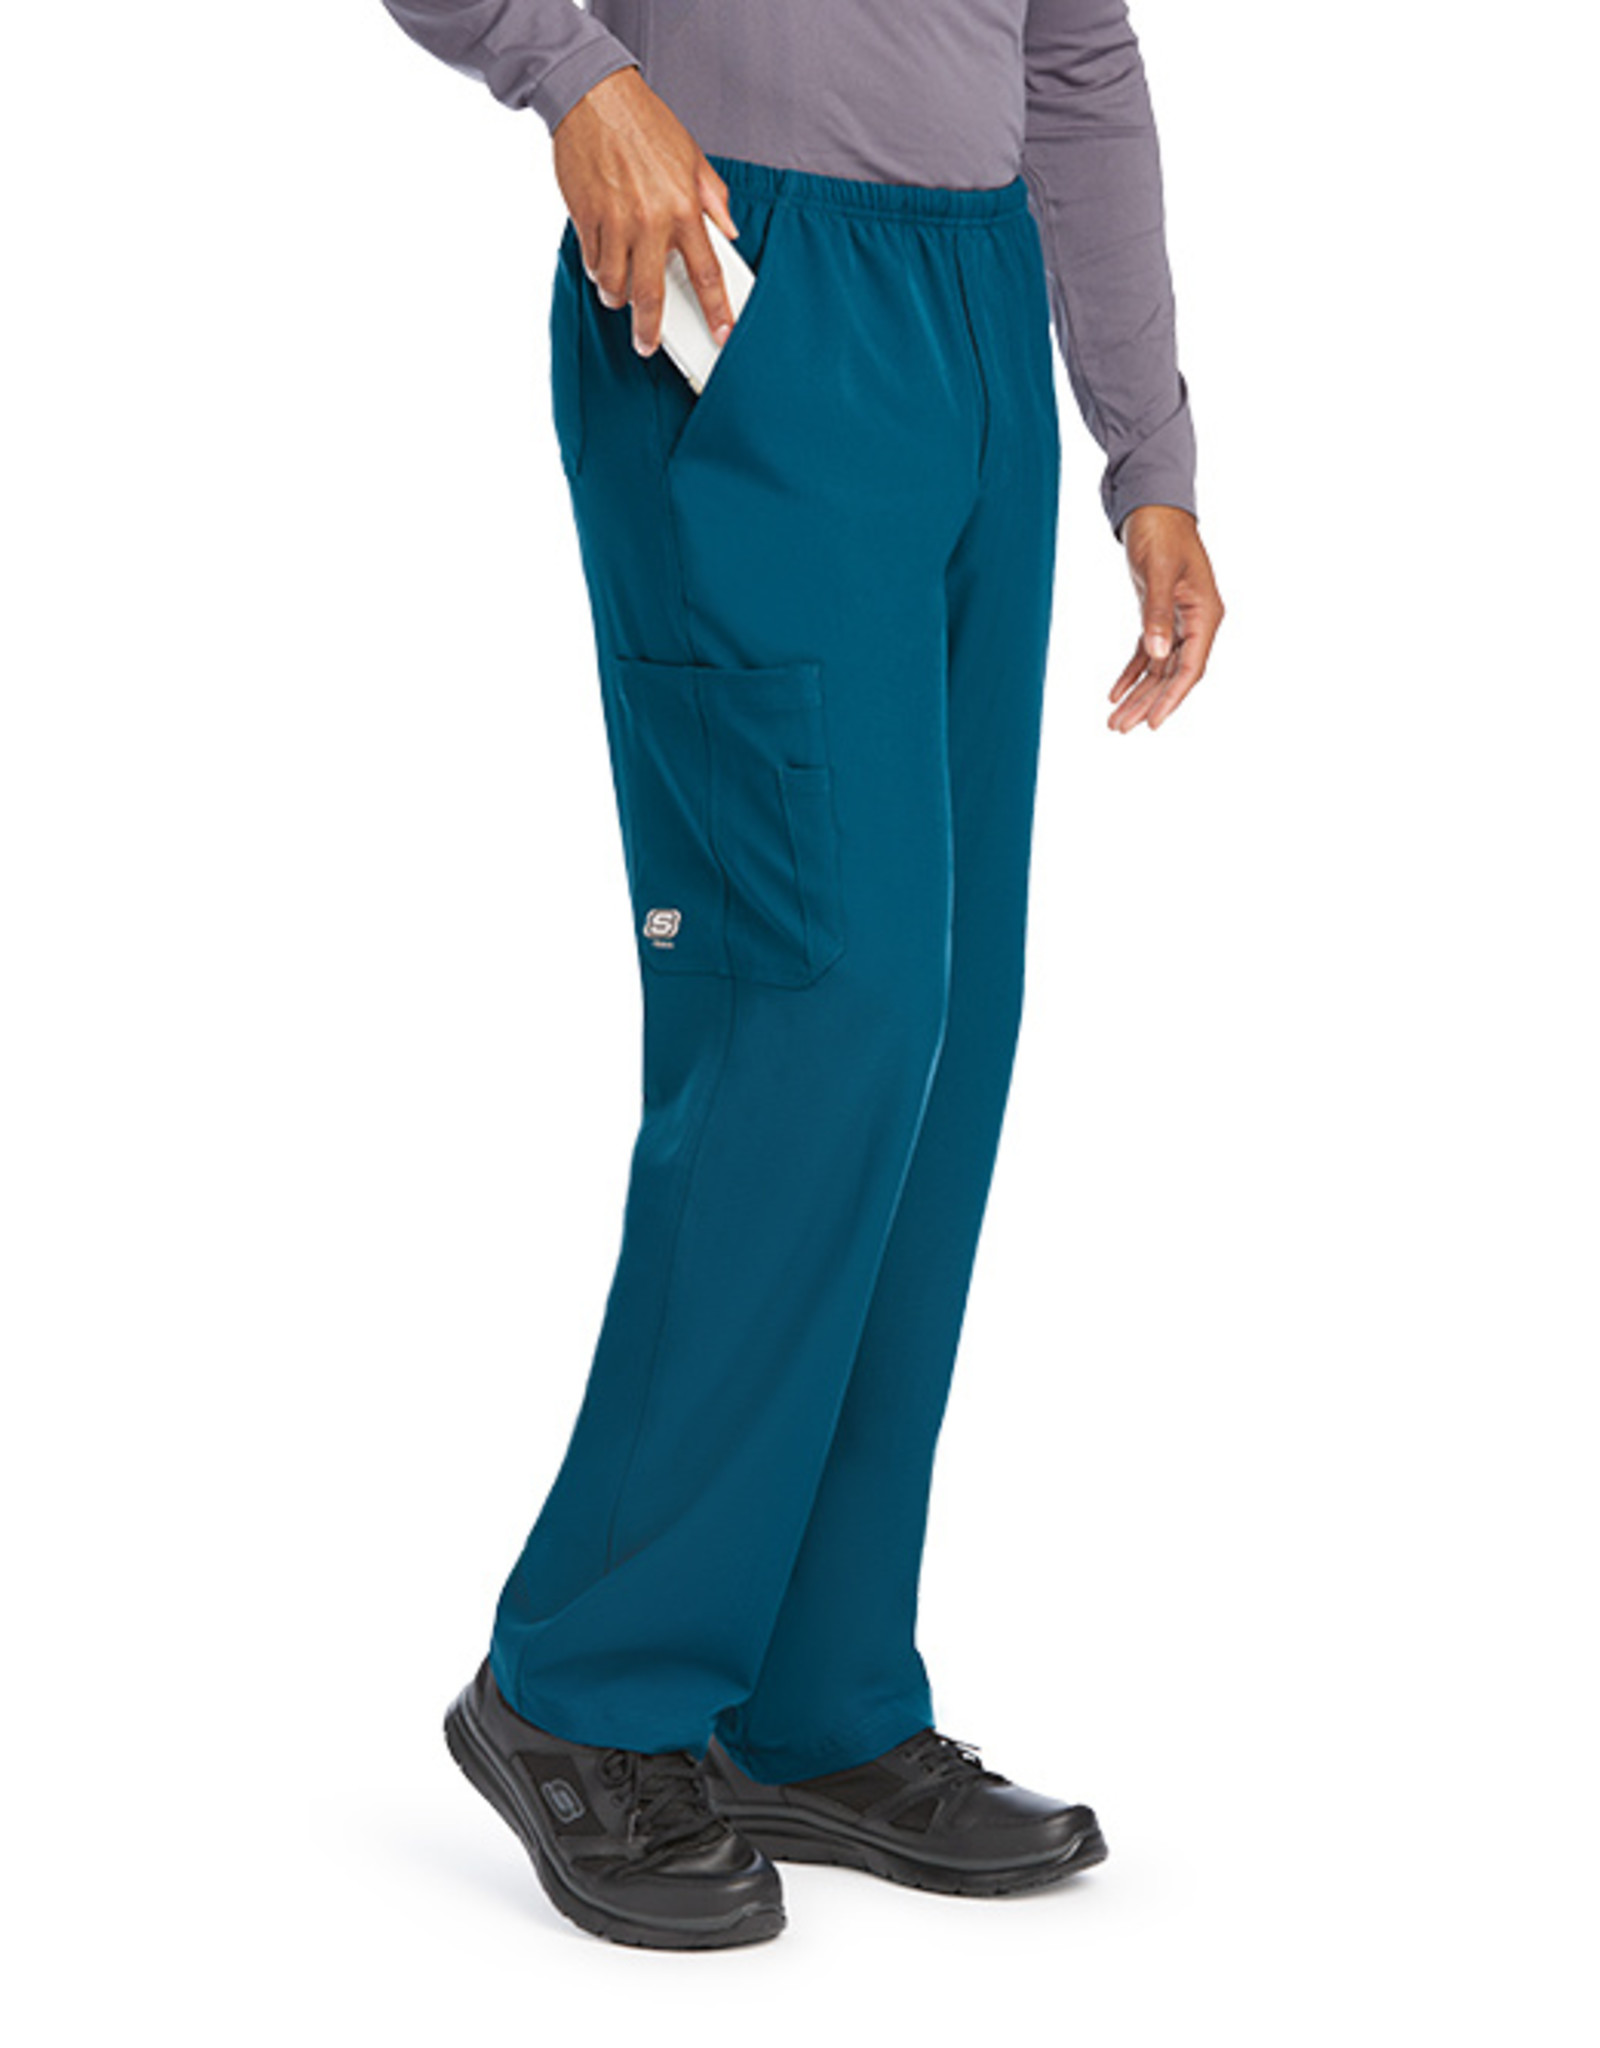 Skechers Reliance 4-Pocket Womens Plus Tall Stretch Fabric Moisture Wicking Scrub  Pants - JCPenney